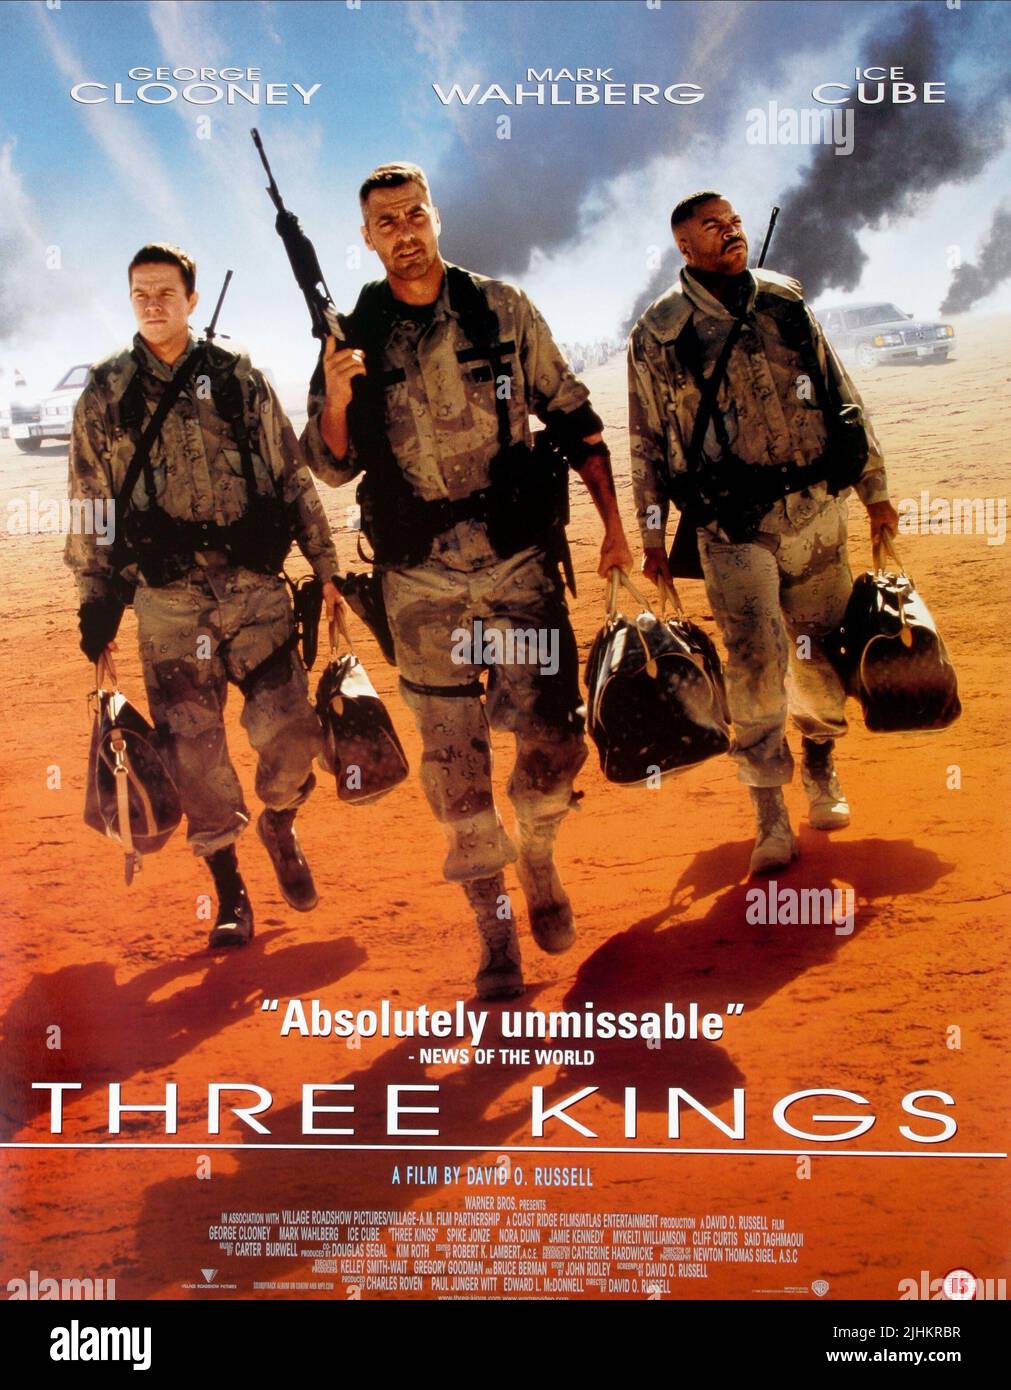 MARK WAHLBERG, GEORGE CLOONEY, ICE CUBE POSTER, THREE KINGS, 1999 Stock Photo